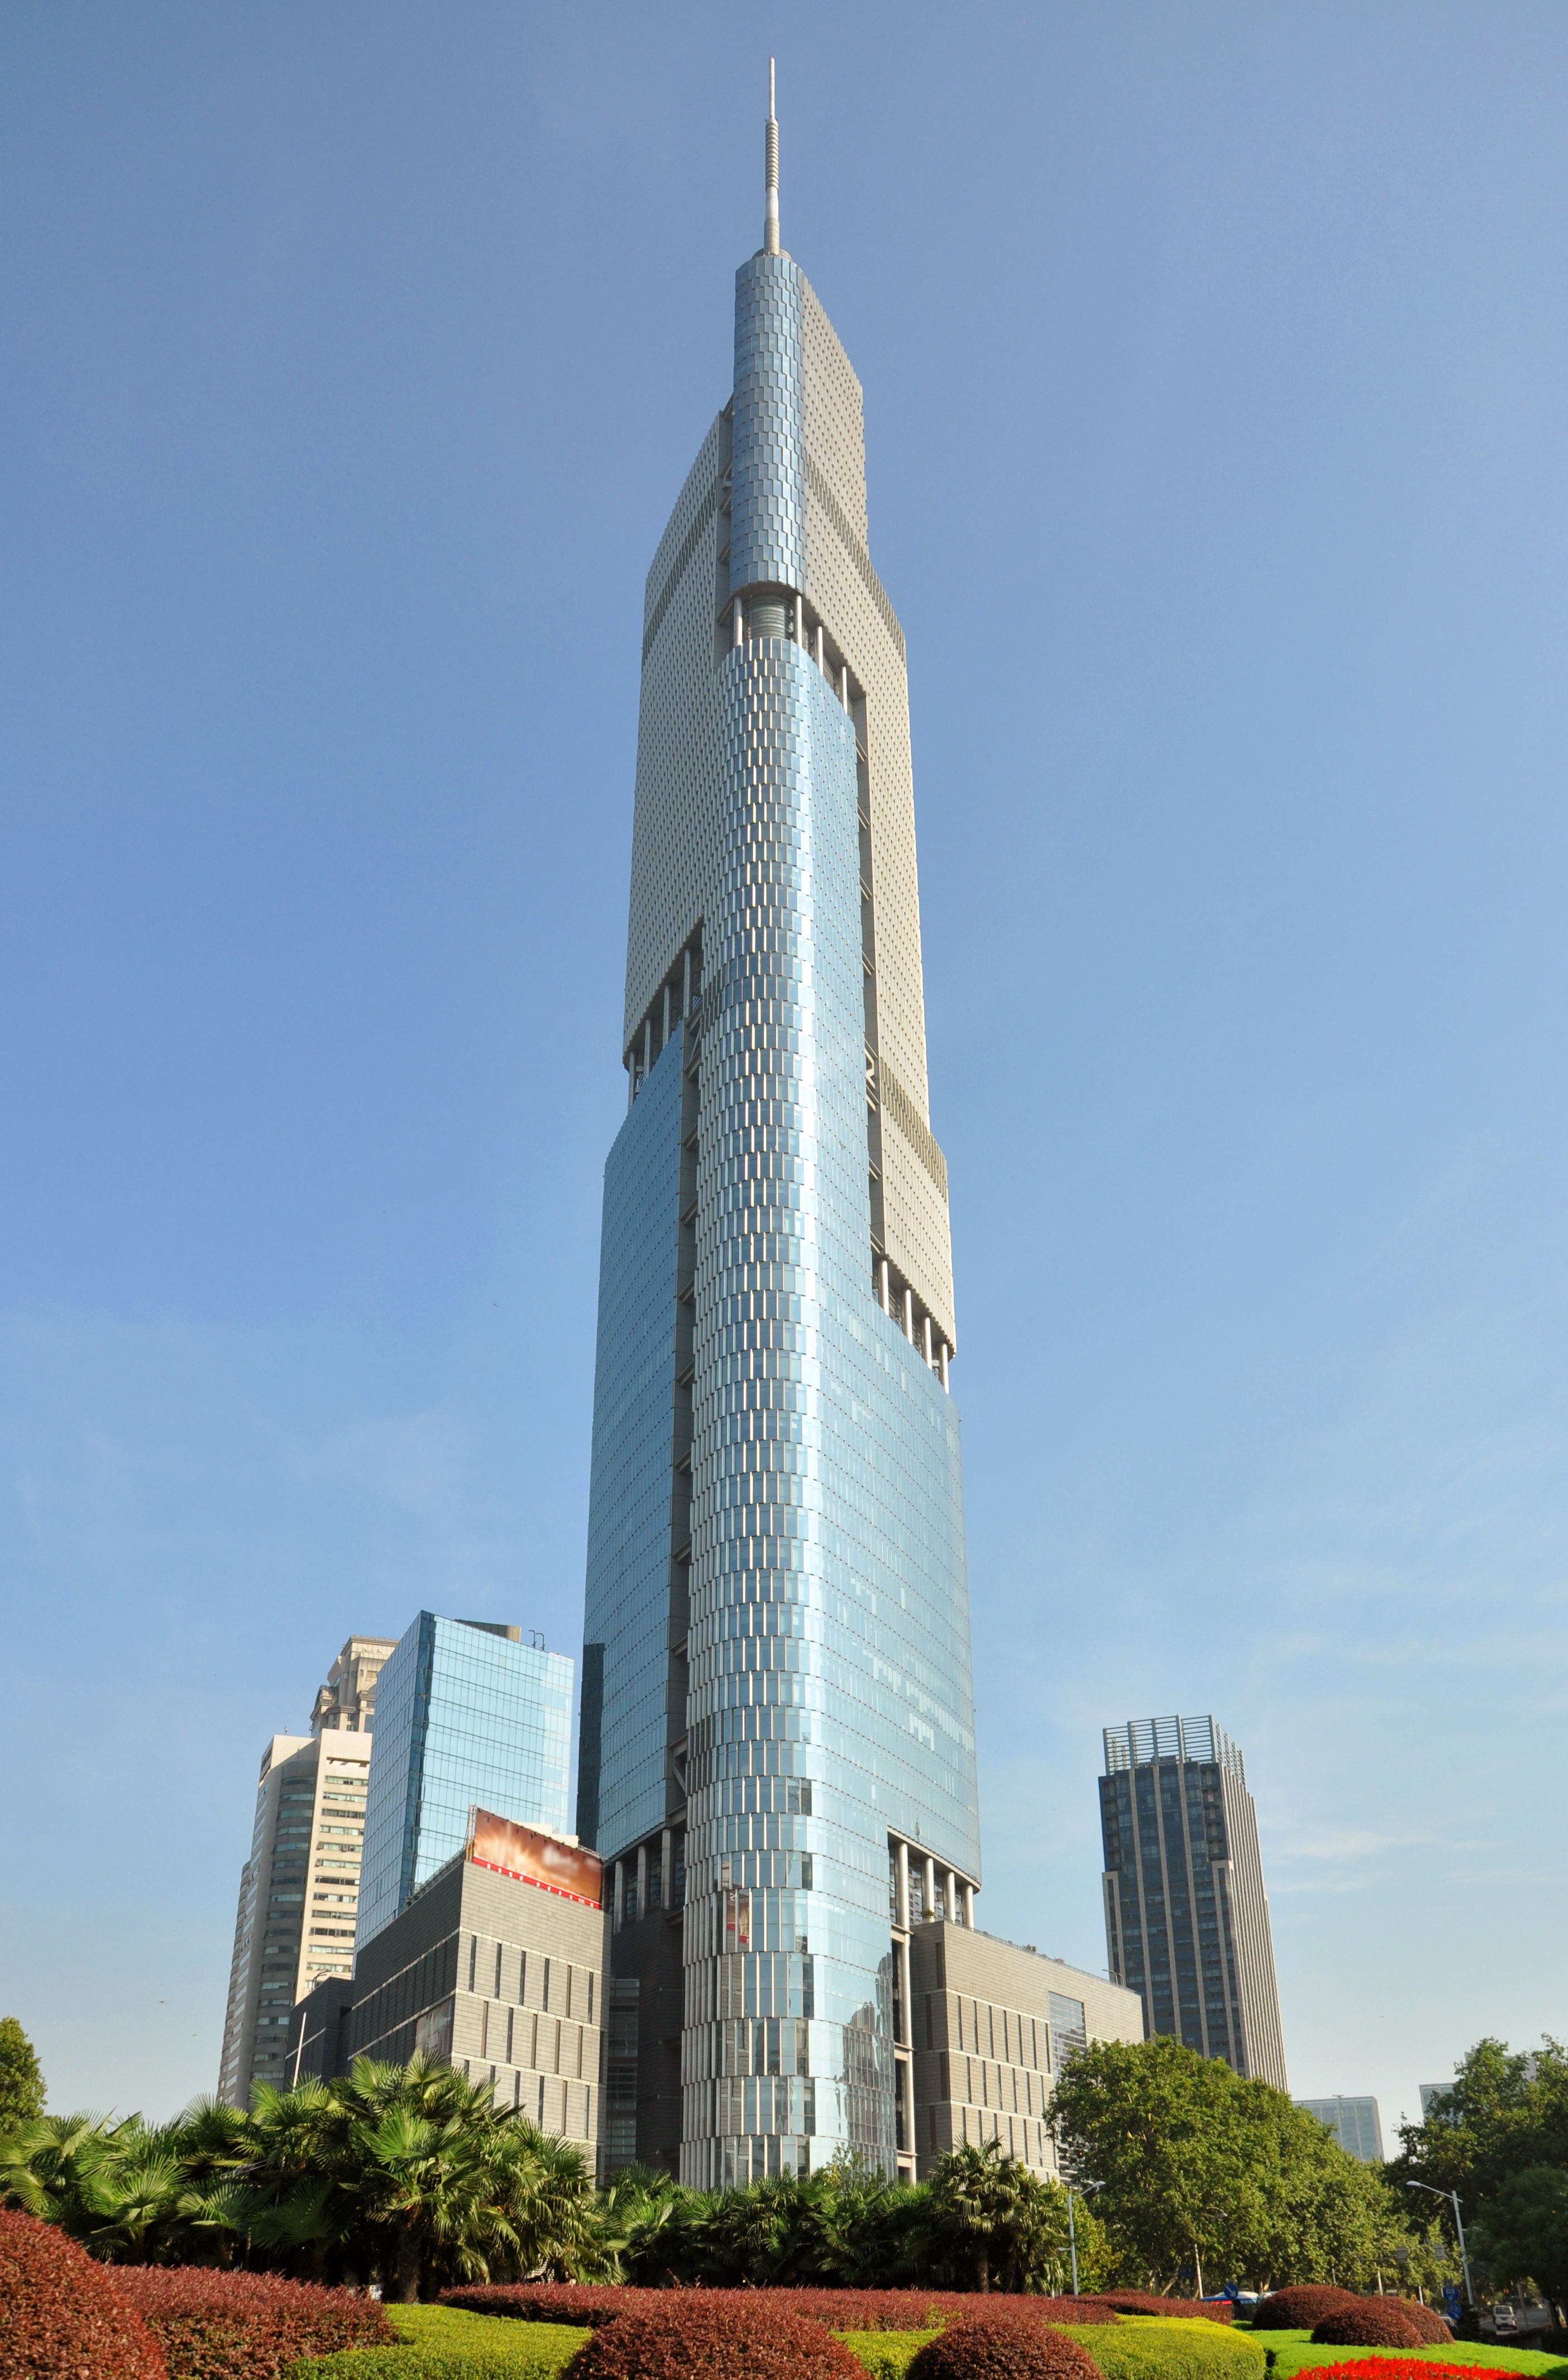 The Tallest Buildings in the World: See the Top 12